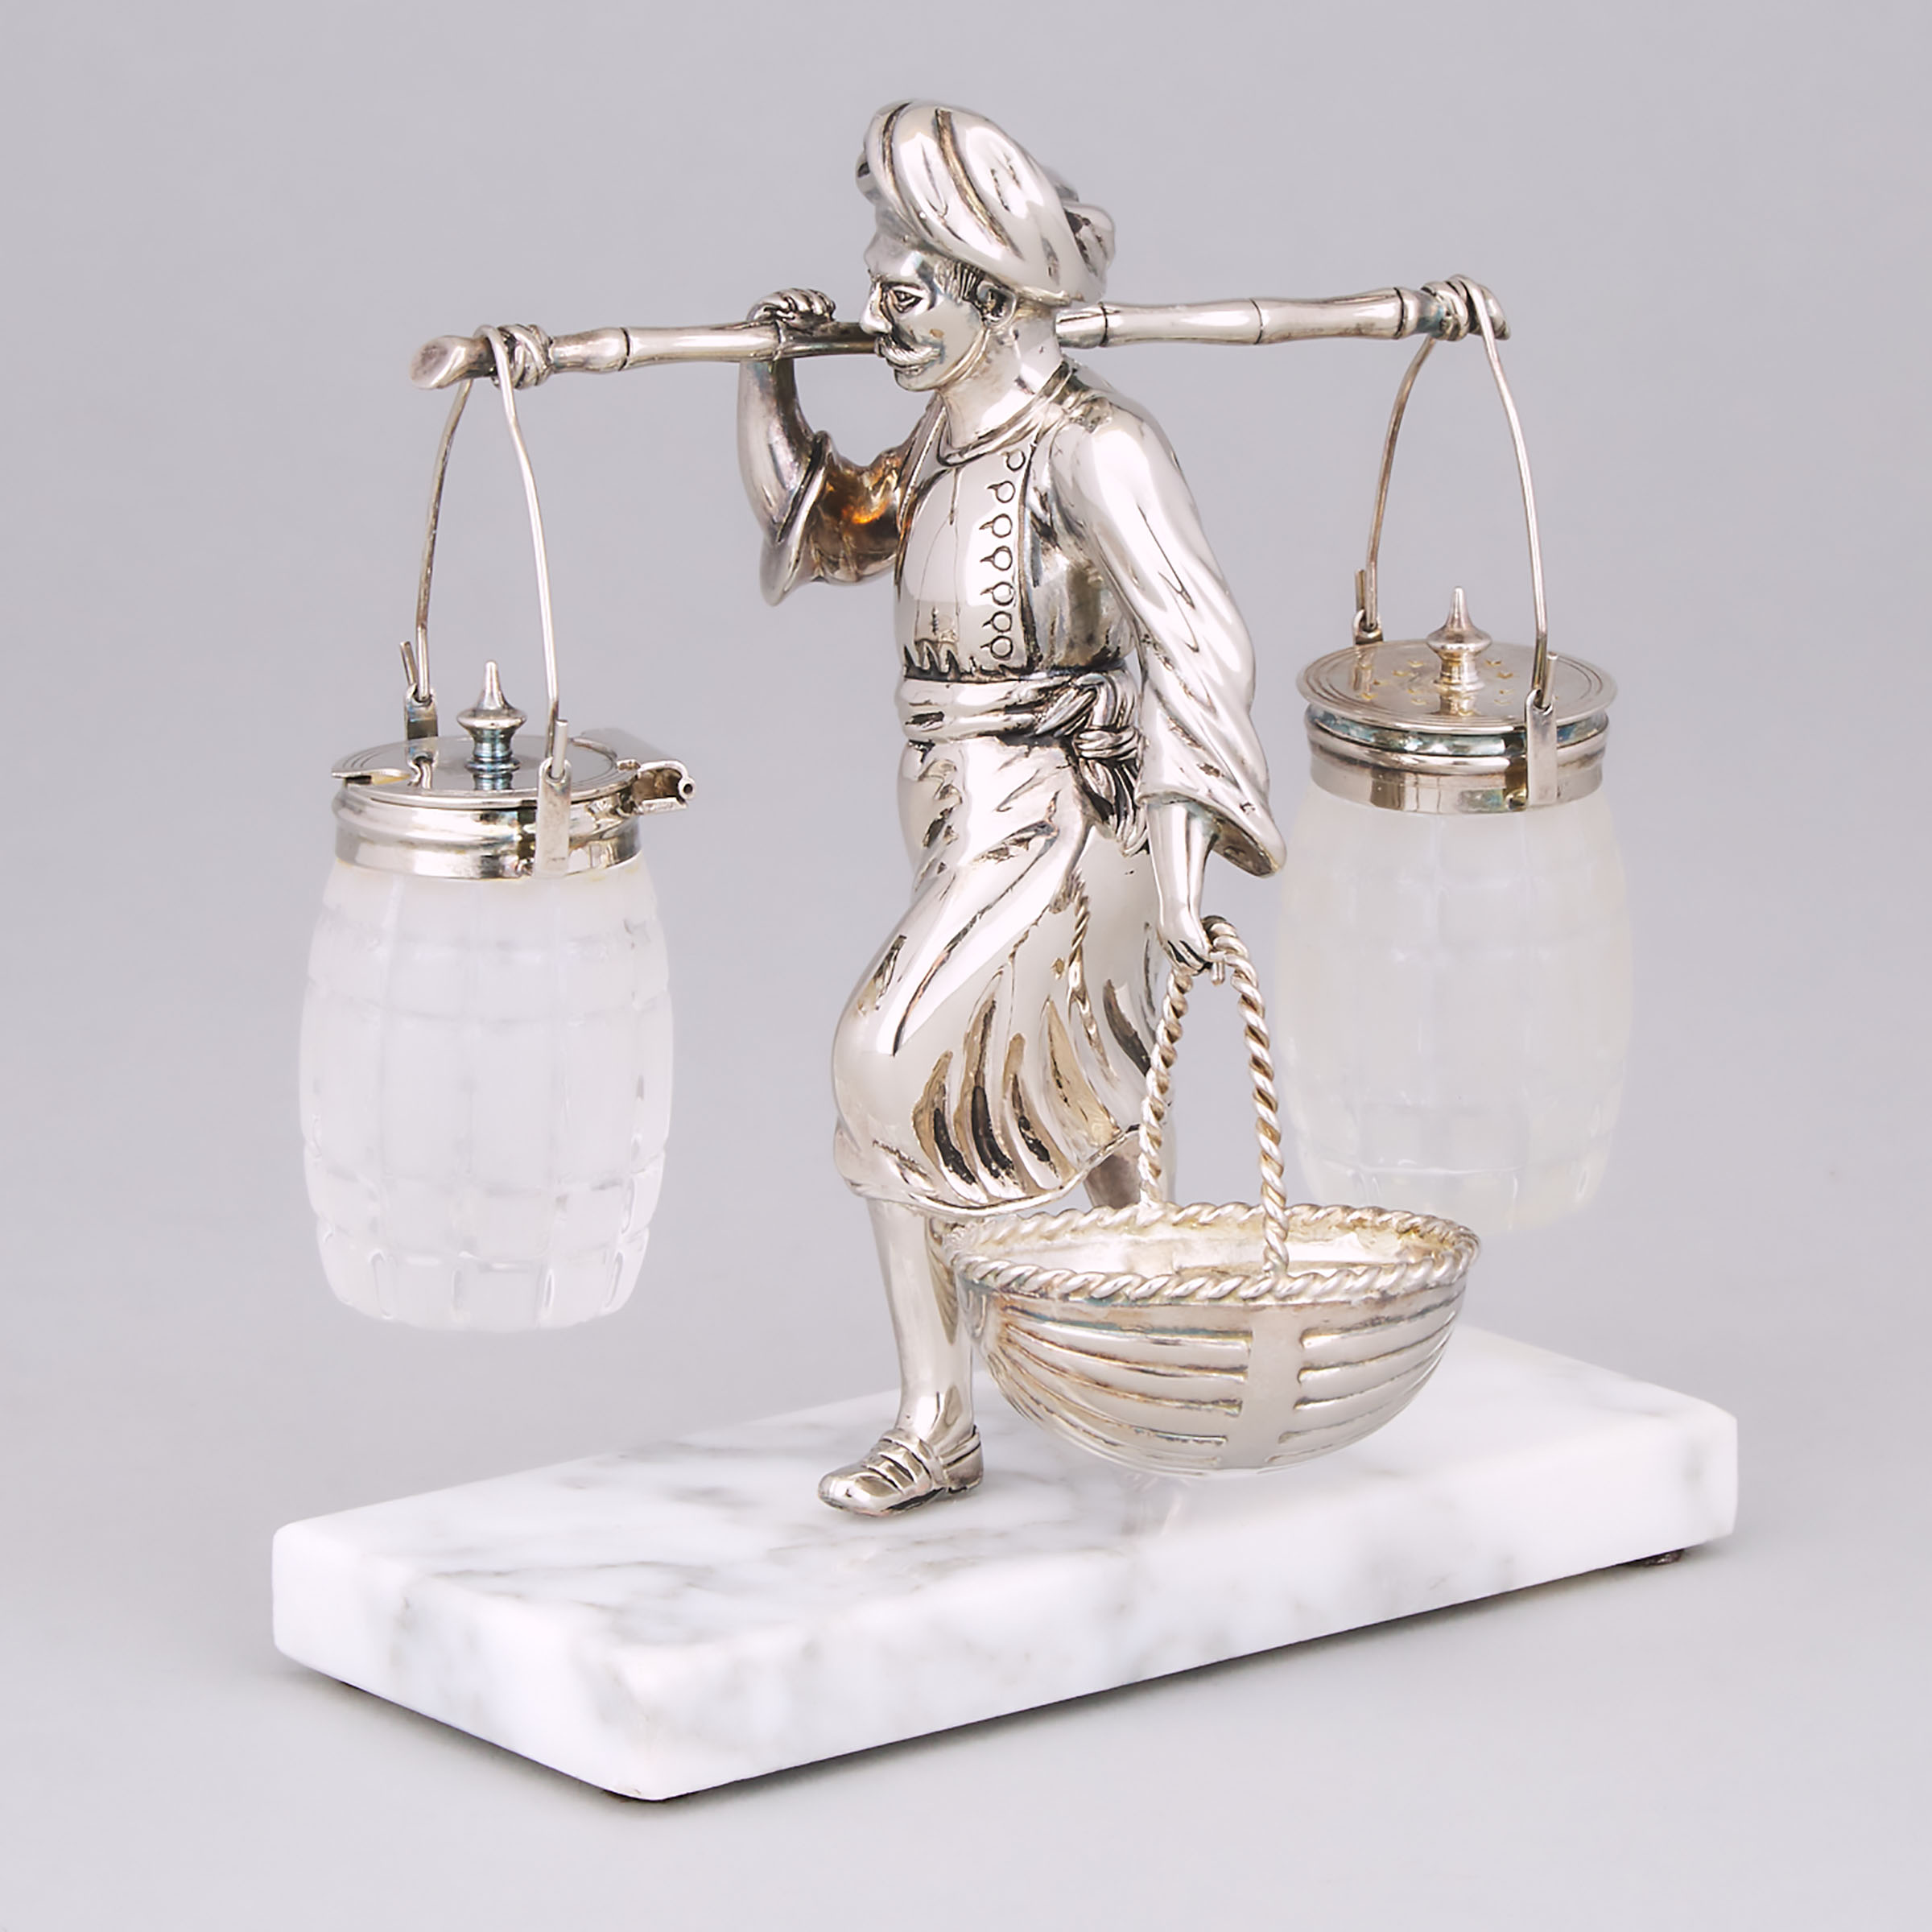 Edwardian Silver Plated Novelty Figural Condiment Cruet, early 20th century